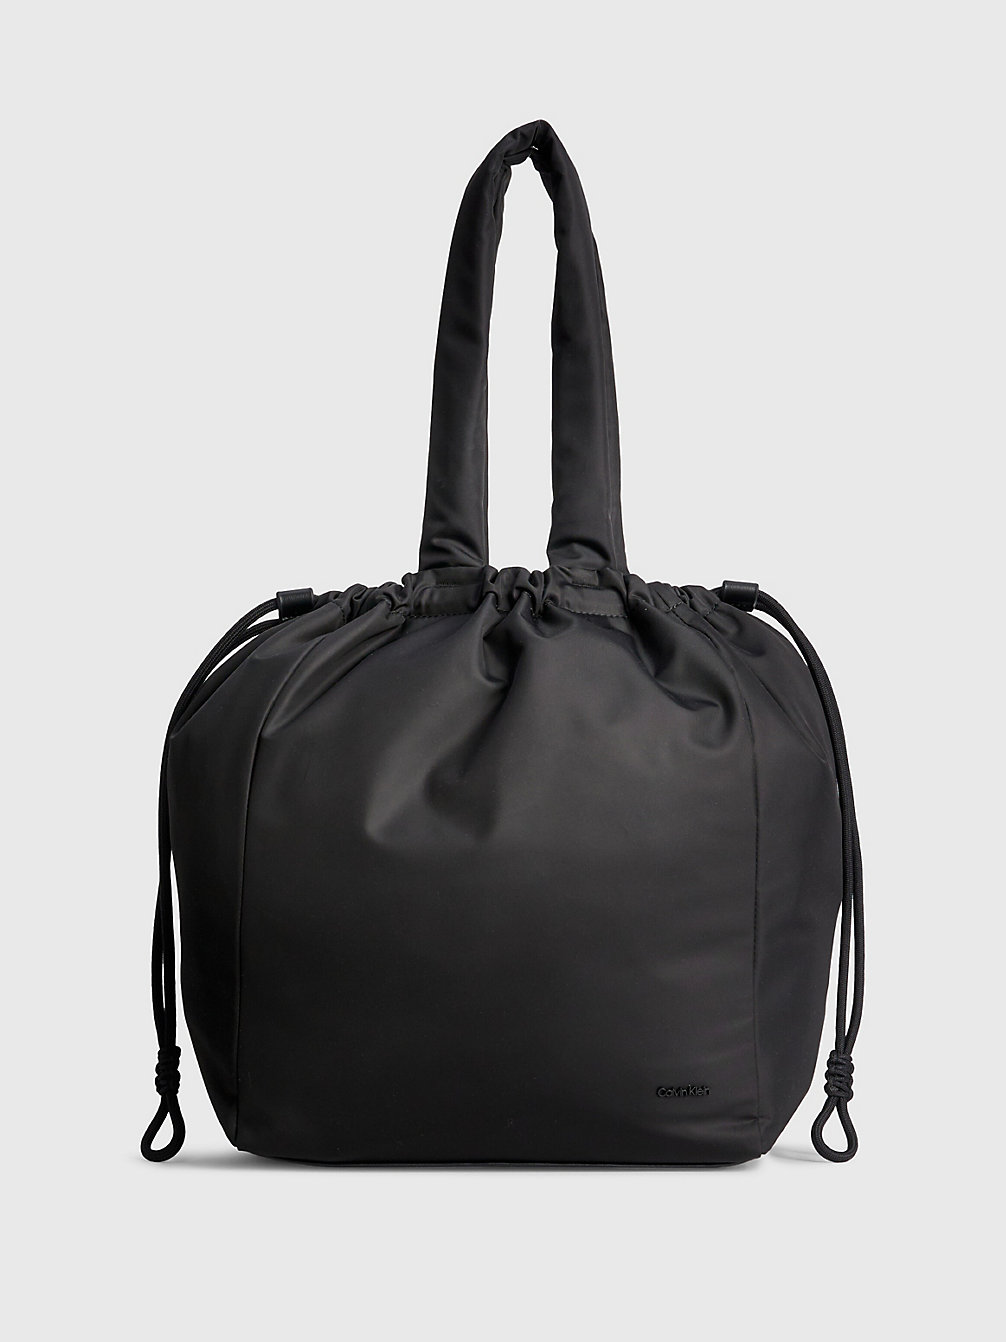 CK BLACK Recycled Tote Bag undefined women Calvin Klein